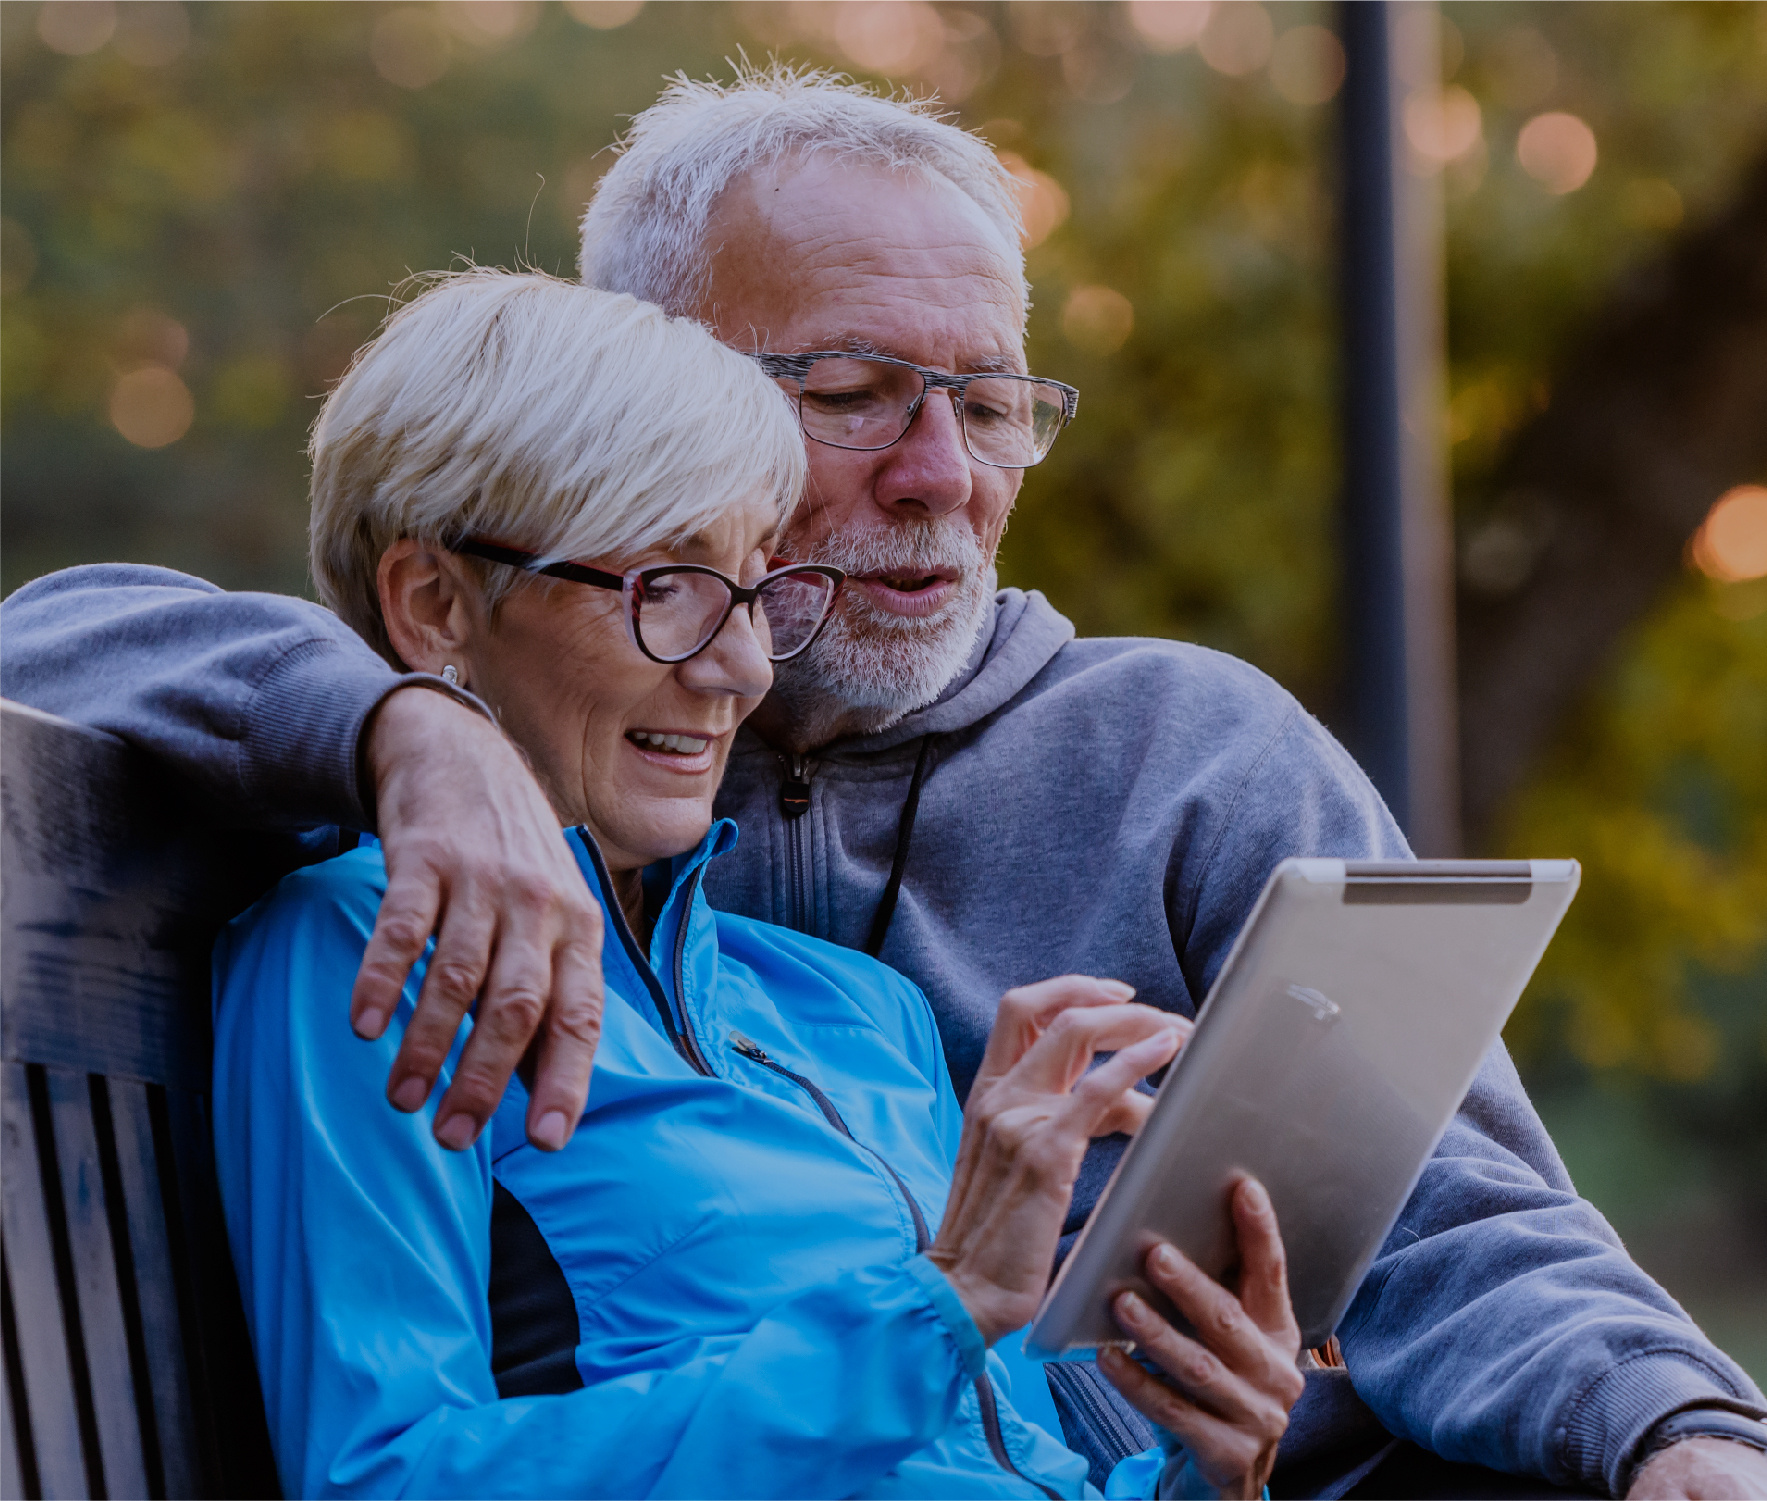 Mature couple sitting on bench looking at tablet